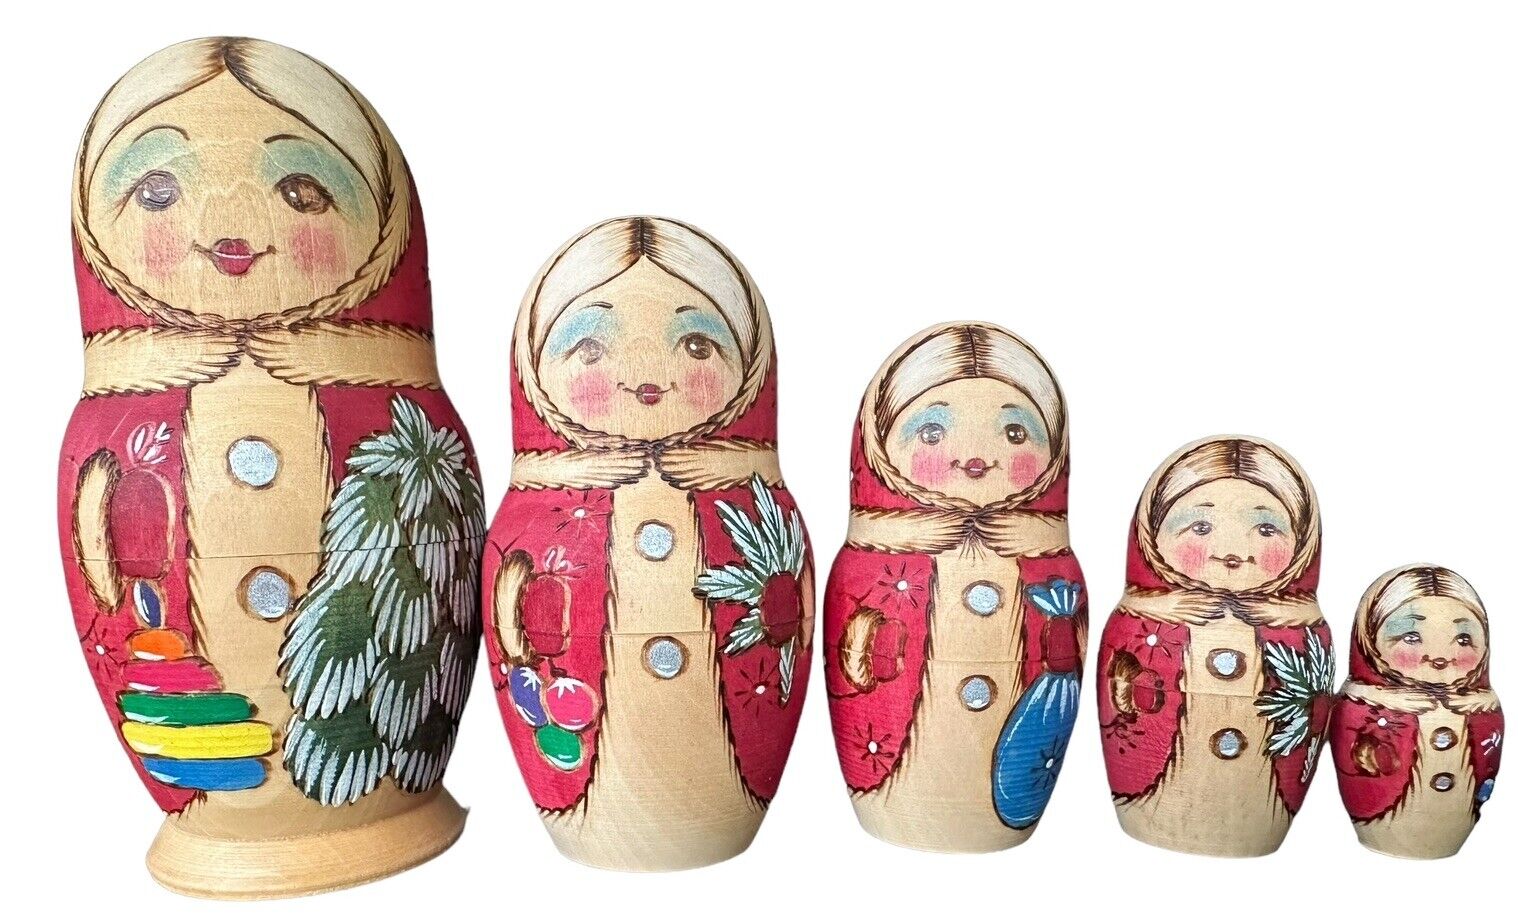 VTG Wood Hand Painted & Signed 5 Piece Russian Nesting Dolls 4 1/2” Christmas